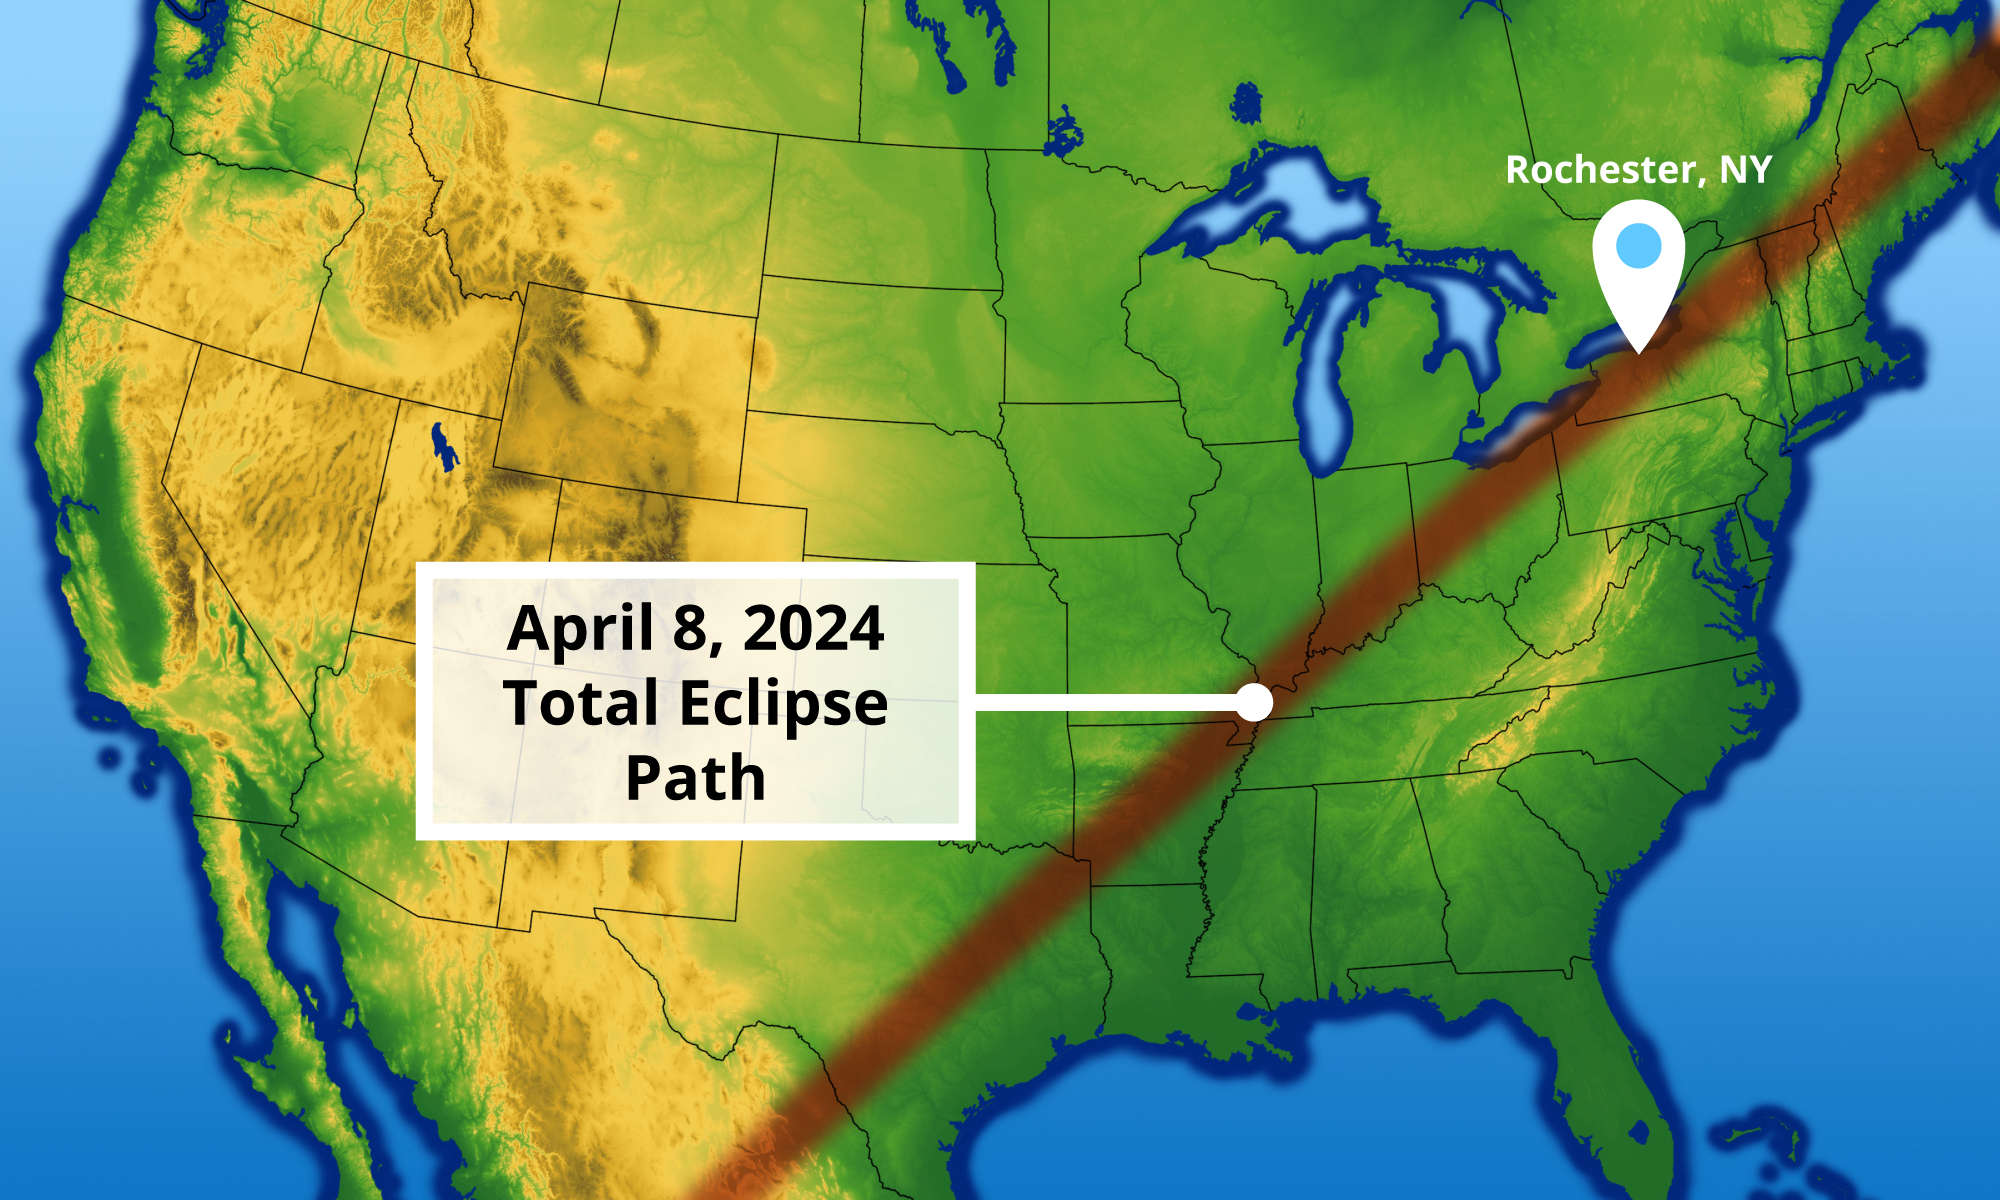 Illustrated map showing the path of the next total solar eclipse on April 8, 2024, with a pin marking Rochester, NY.